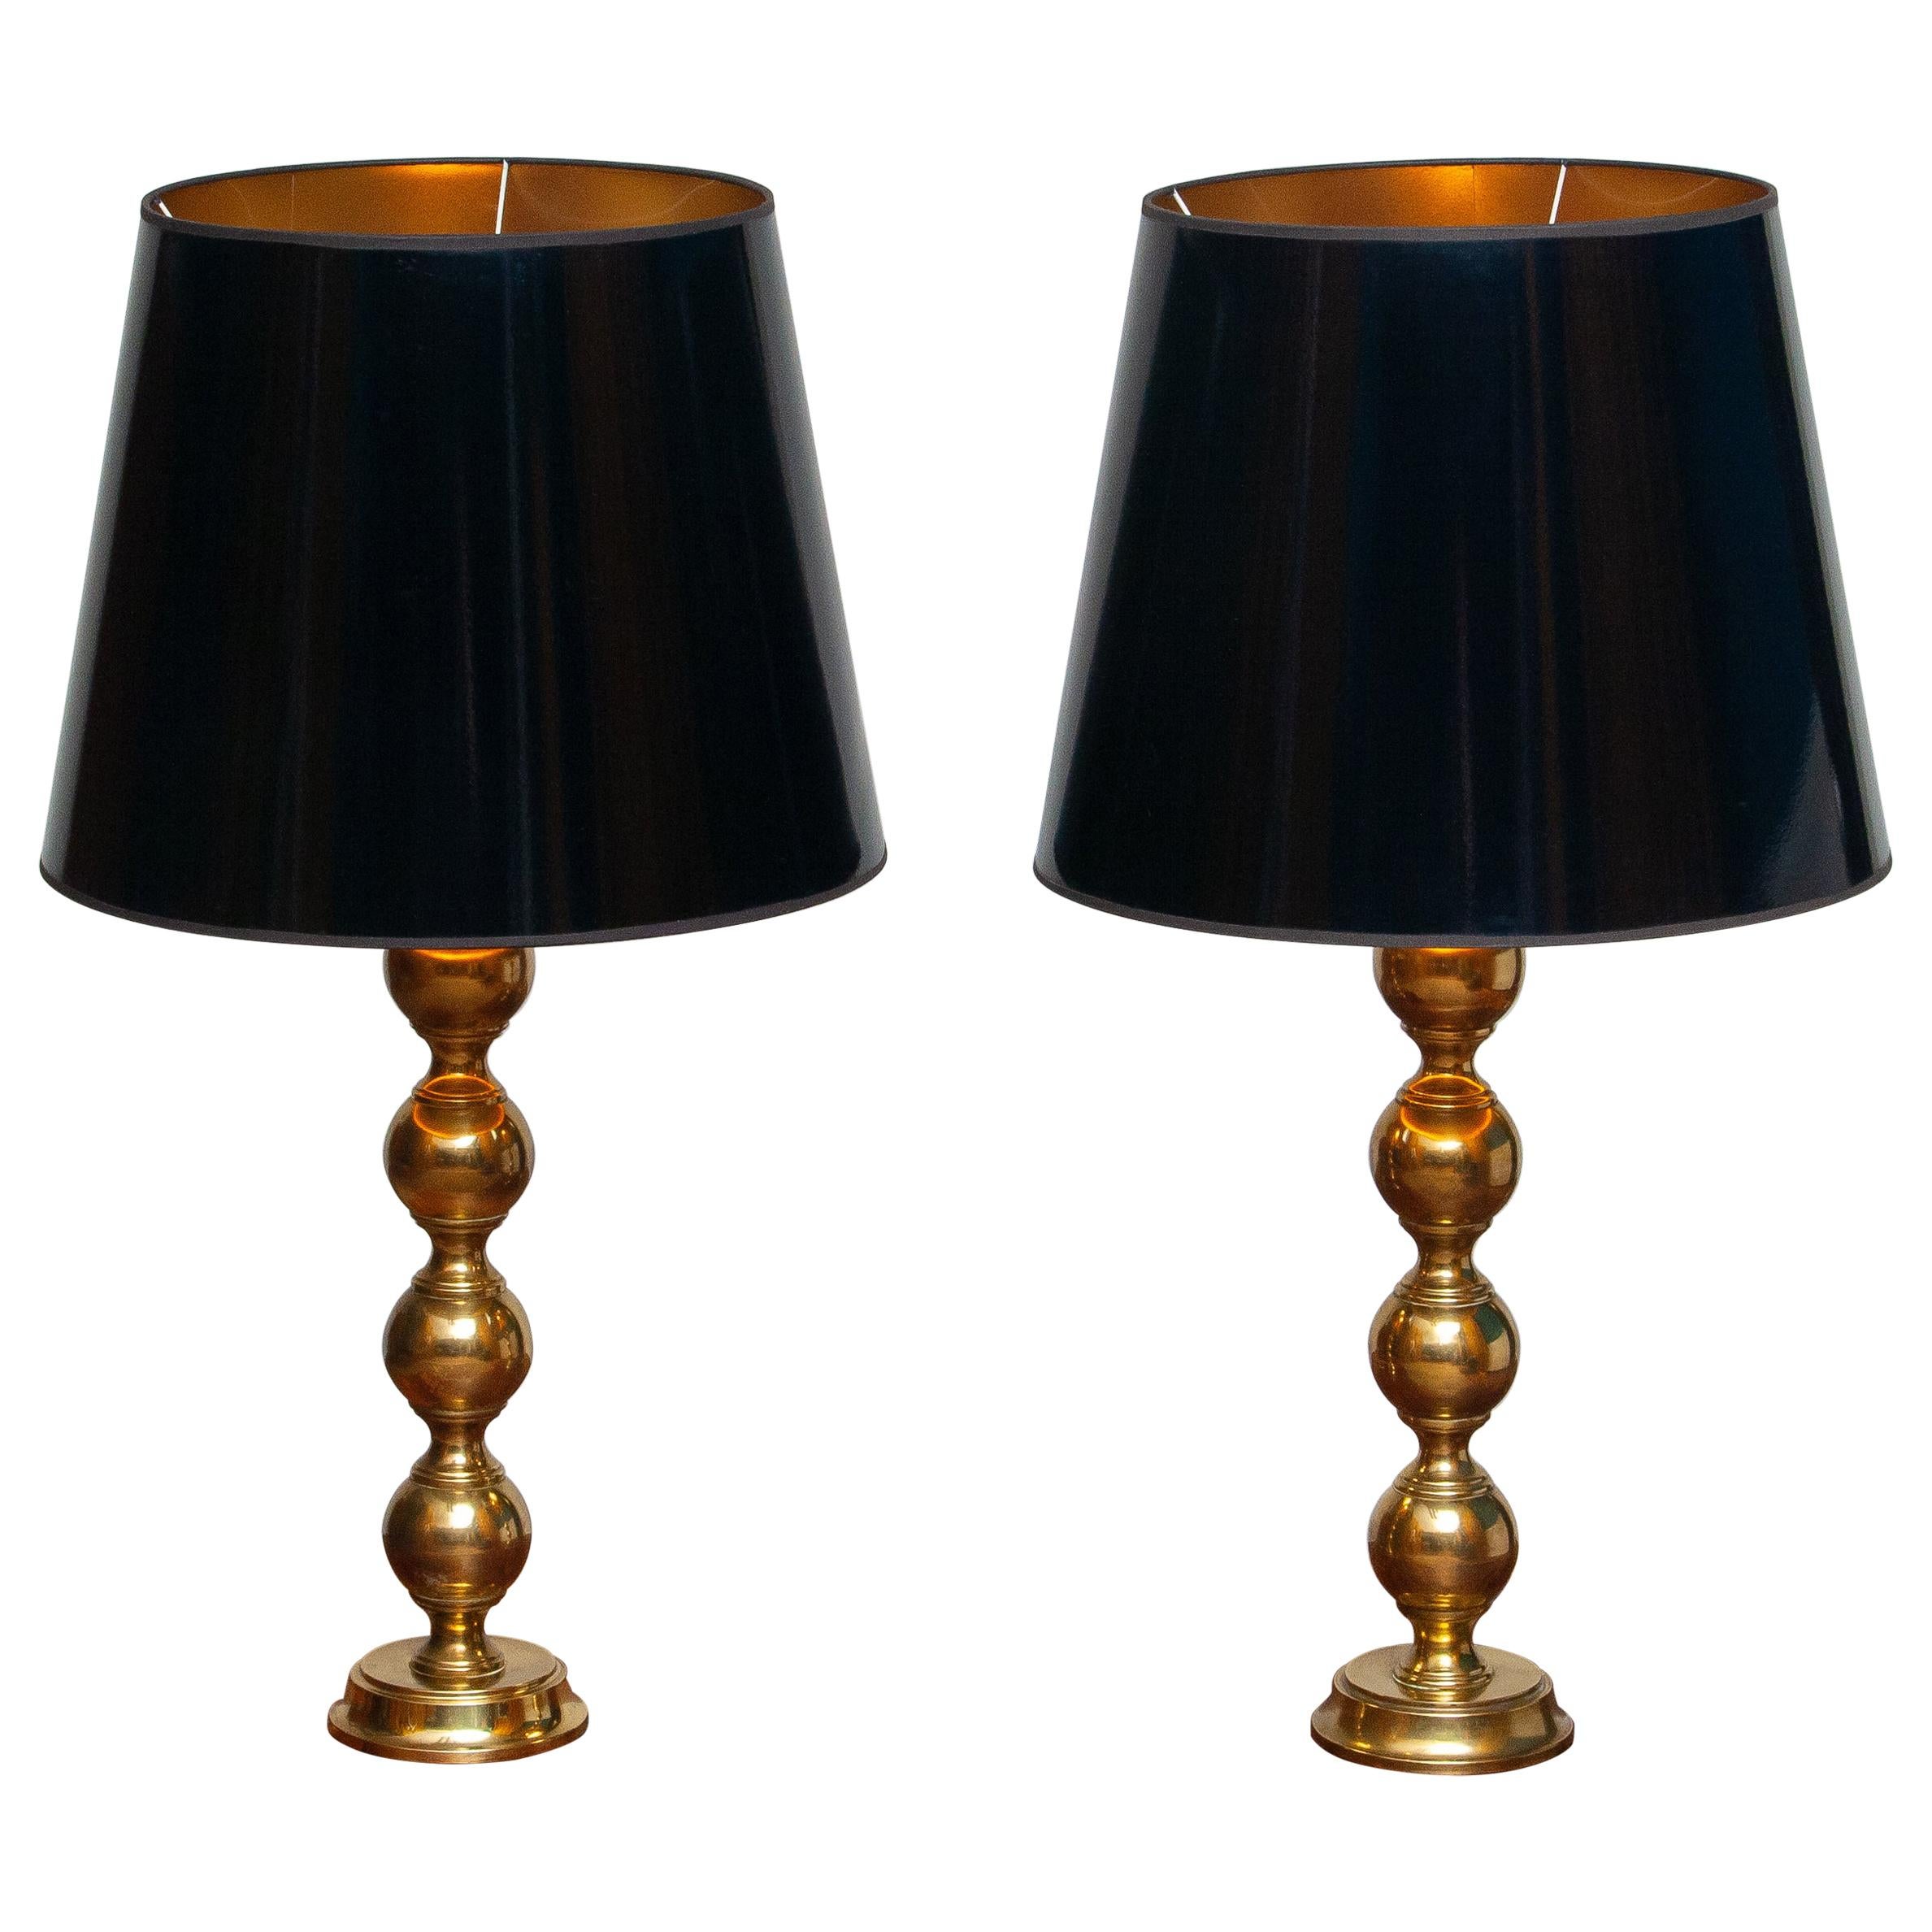 1950s, Set Brass Spherical Extra Large Swedish Table Lamps with Black Shades